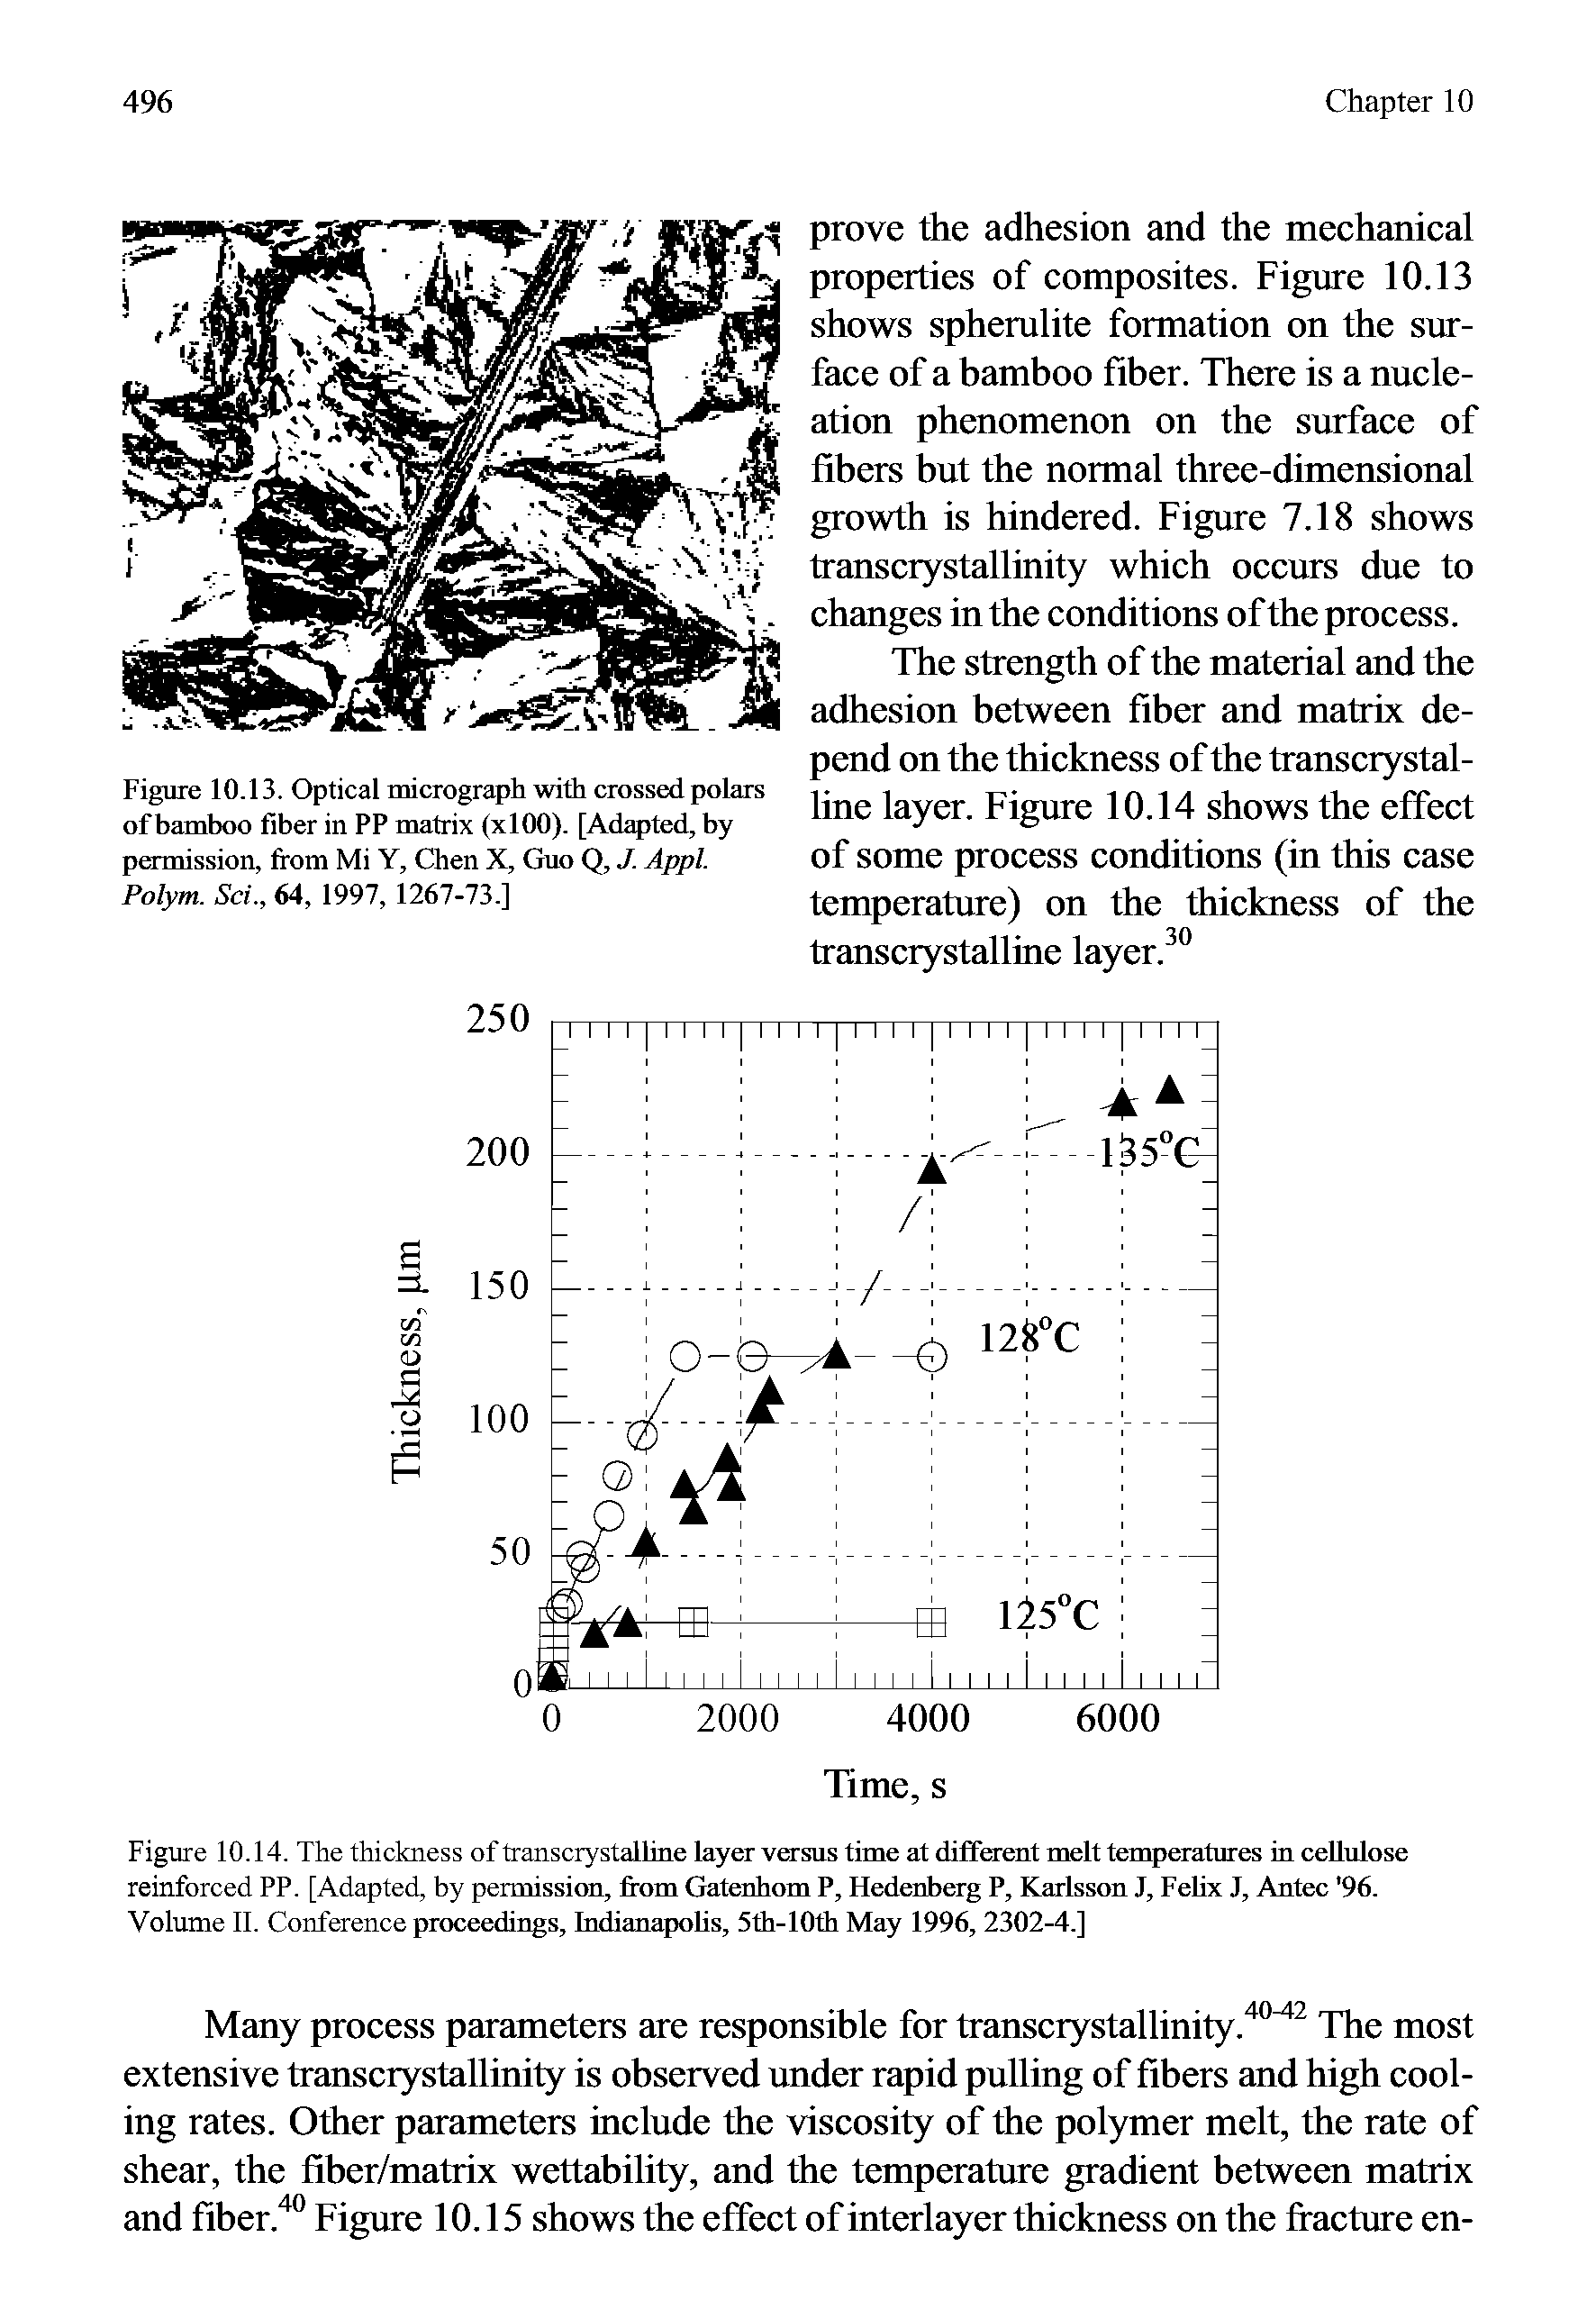 Figure 10.14. The thickness of transcrystalline layer versus time at different melt temperatures in cellulose reinforced PP. [Adapted, by permission, from Gatenhom P, Hedenberg P, Karlsson J, Fehx J, Antec 96. Volume II. Conference proceedings, Indianapohs, 5th-10th May 1996, 2302-4.]...